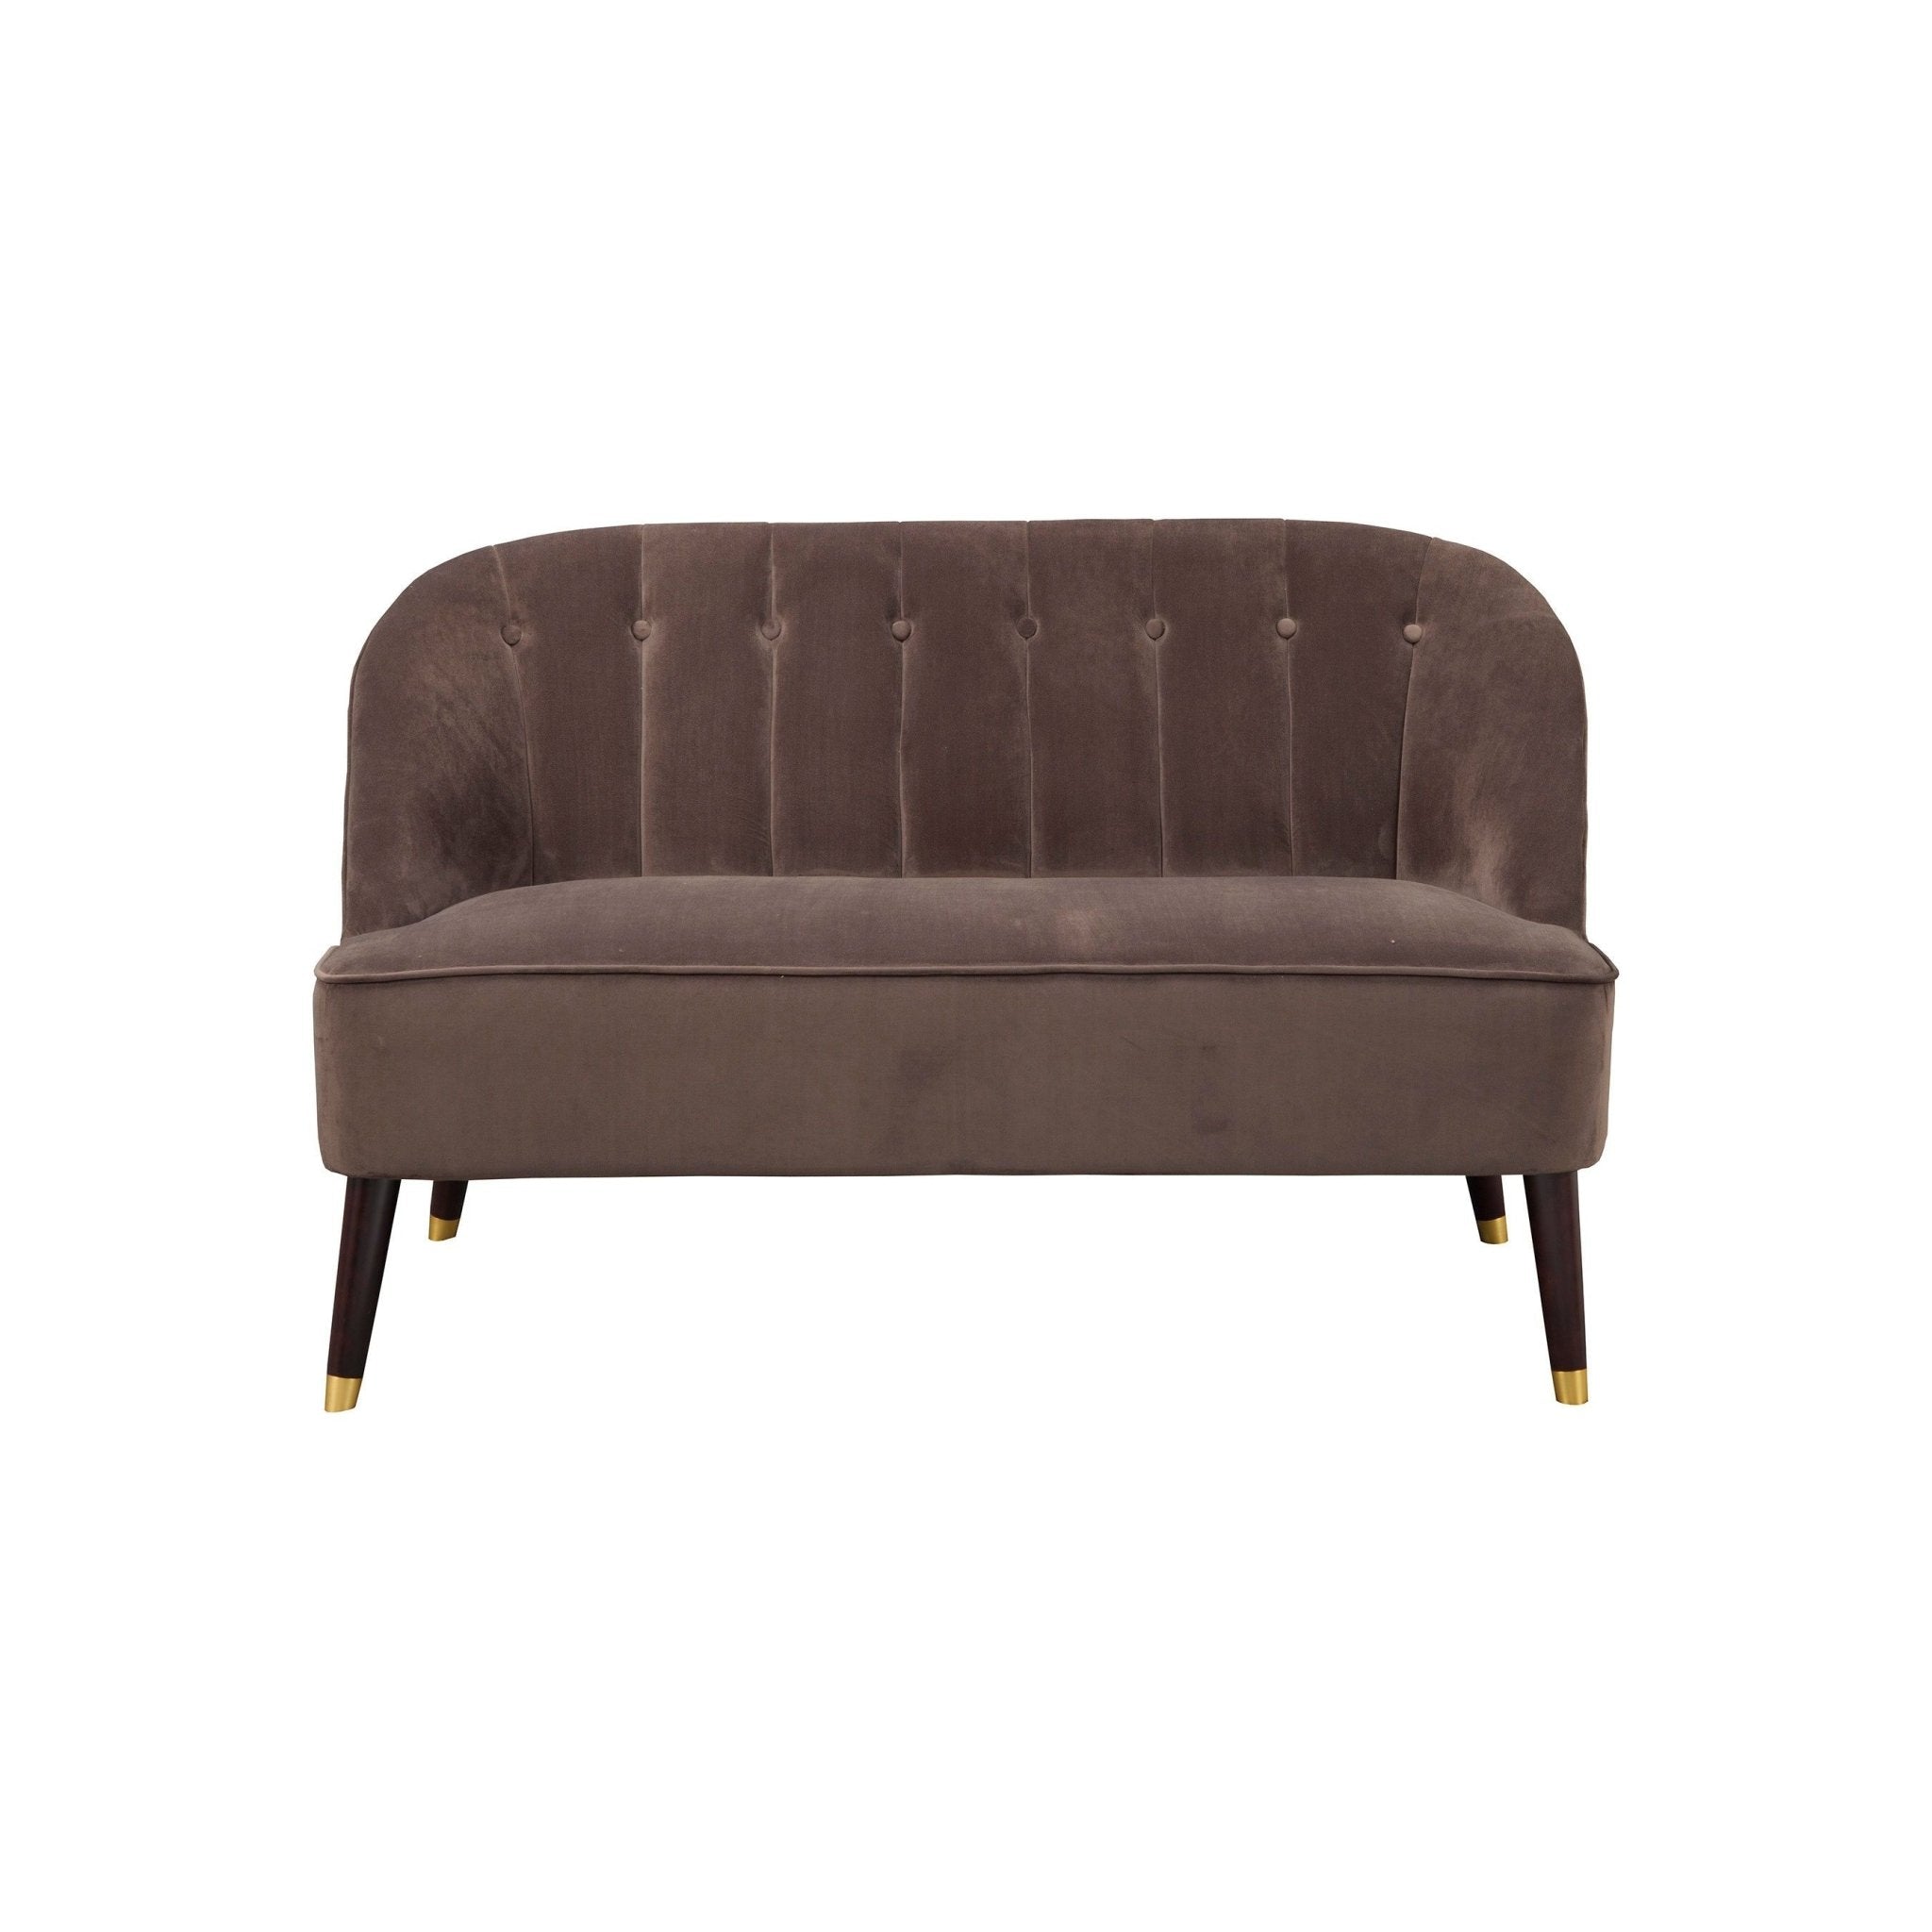 Deco Upholstered Bench, Brown/Gold